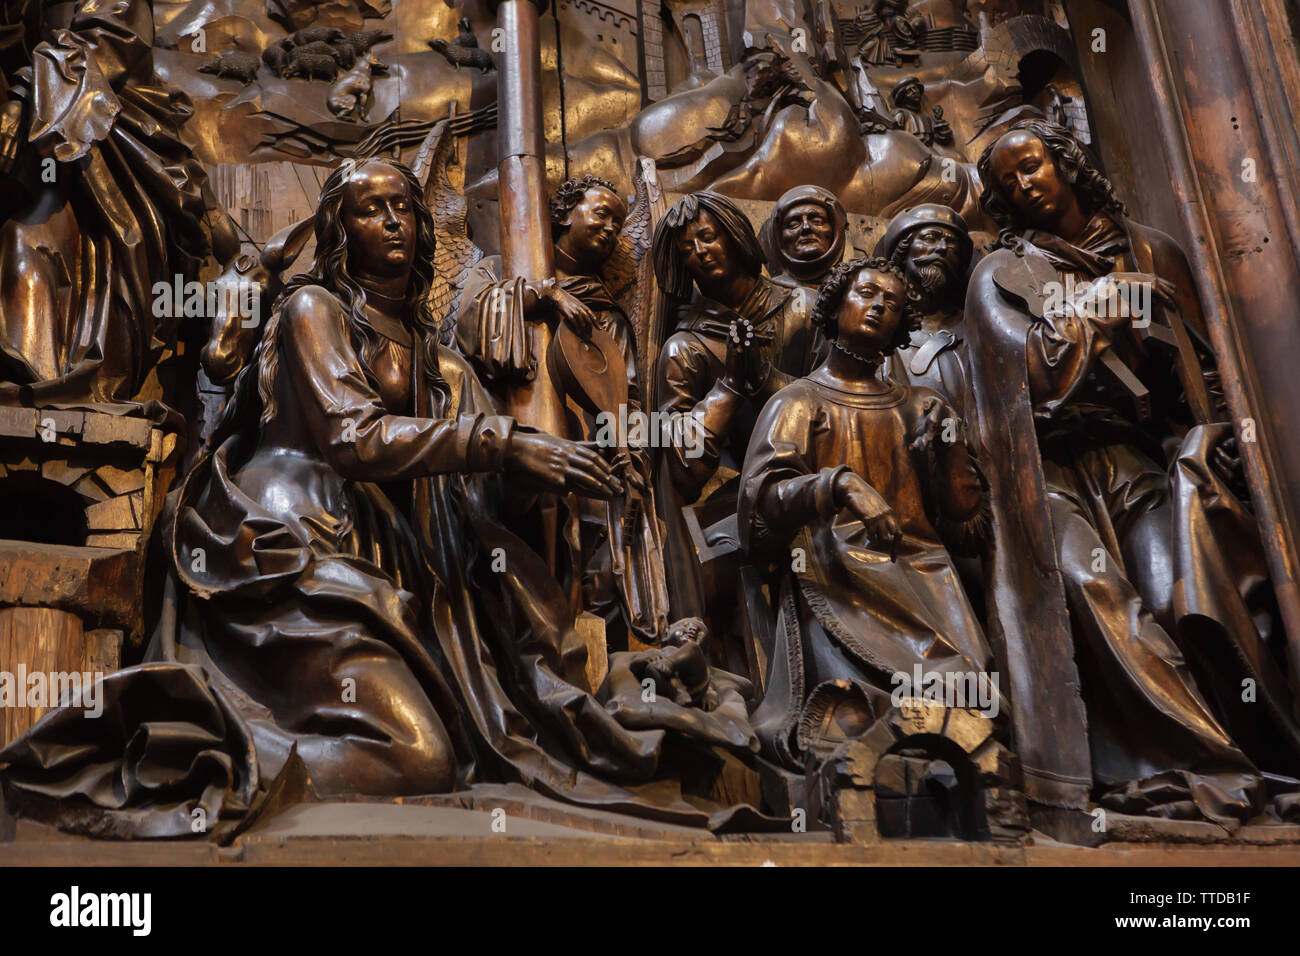 Nativity of Jesus depicted in the basswood carved relief by German sculptor Veit Stoss (Veit Stoß) on the Nativity Altar (Veit-Stoß-Altar) in the Bamberg Cathedral (Bamberger Dom) in Bamberg, Upper Franconia, Germany. Stock Photo